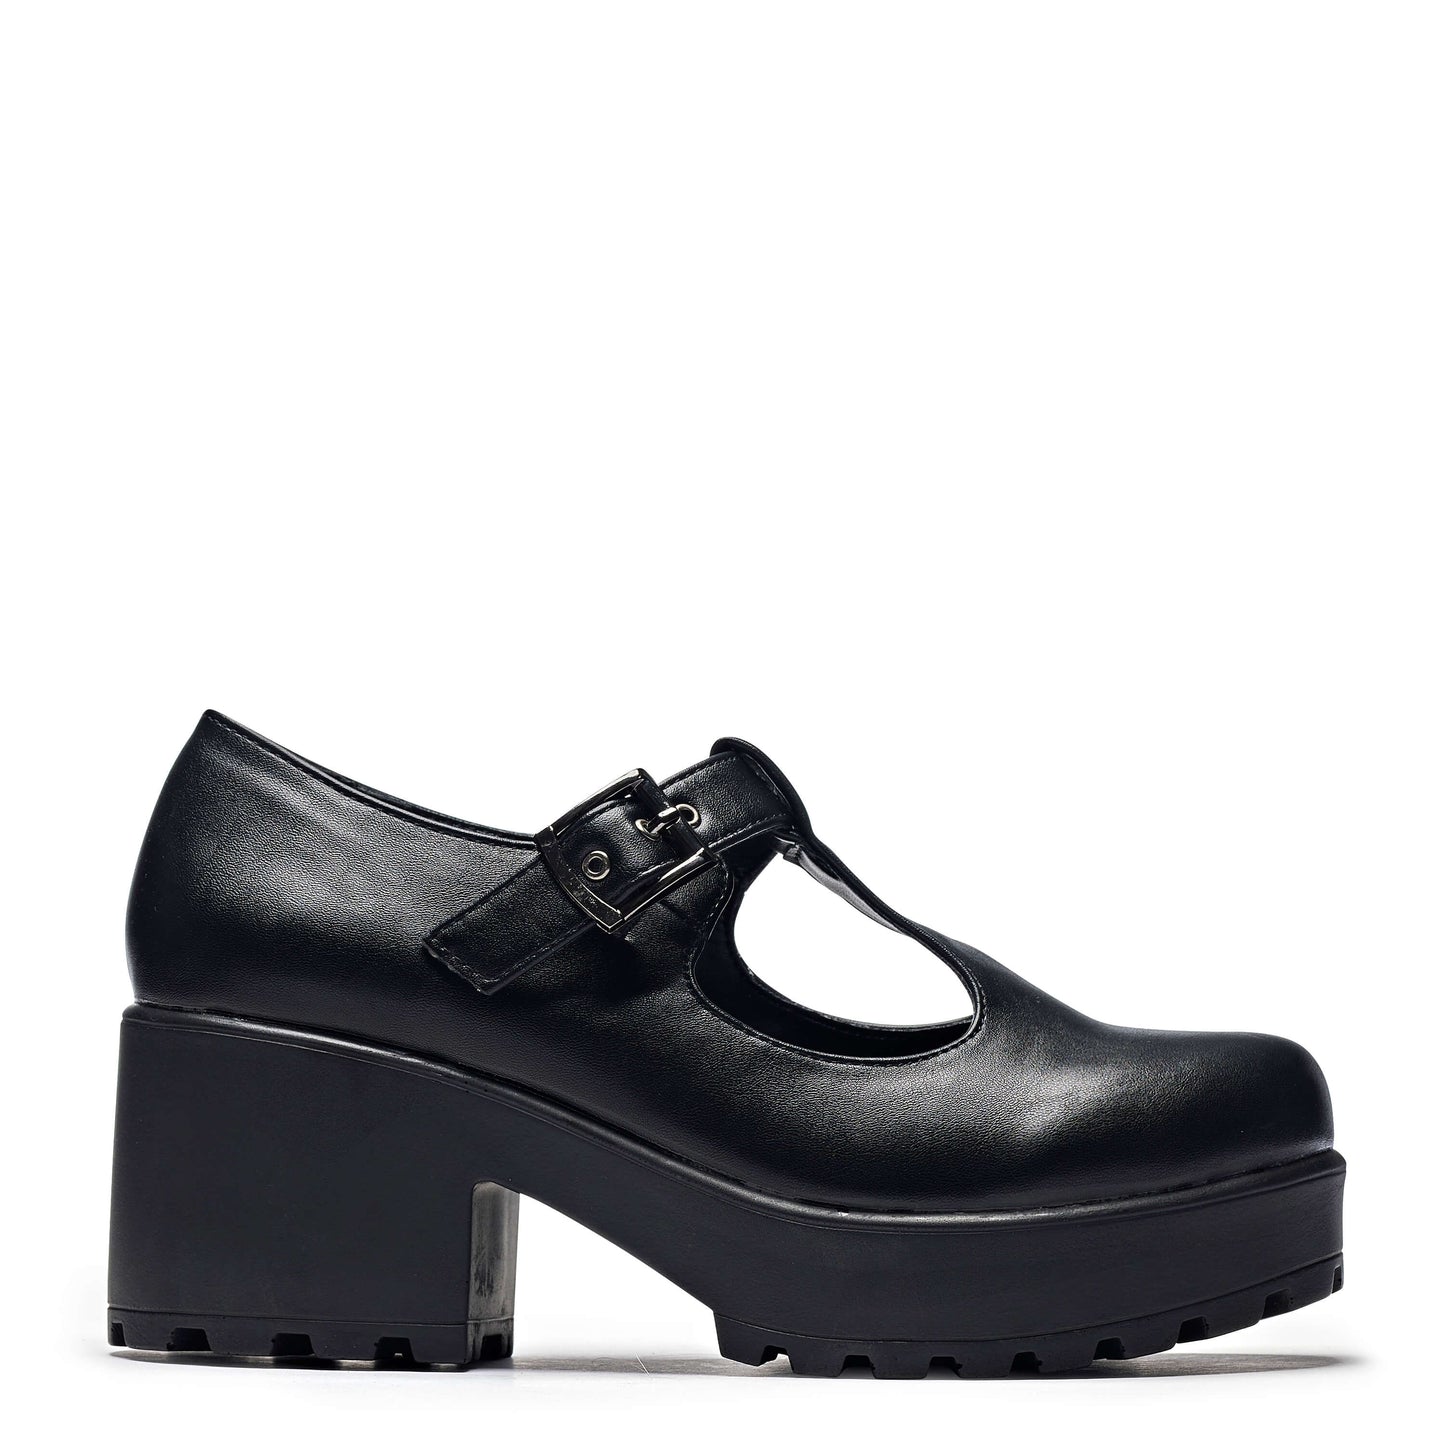 SAI Black Mary Jane Shoes 'Faux Leather Edition' - Mary Janes - KOI Footwear - Black - Side View